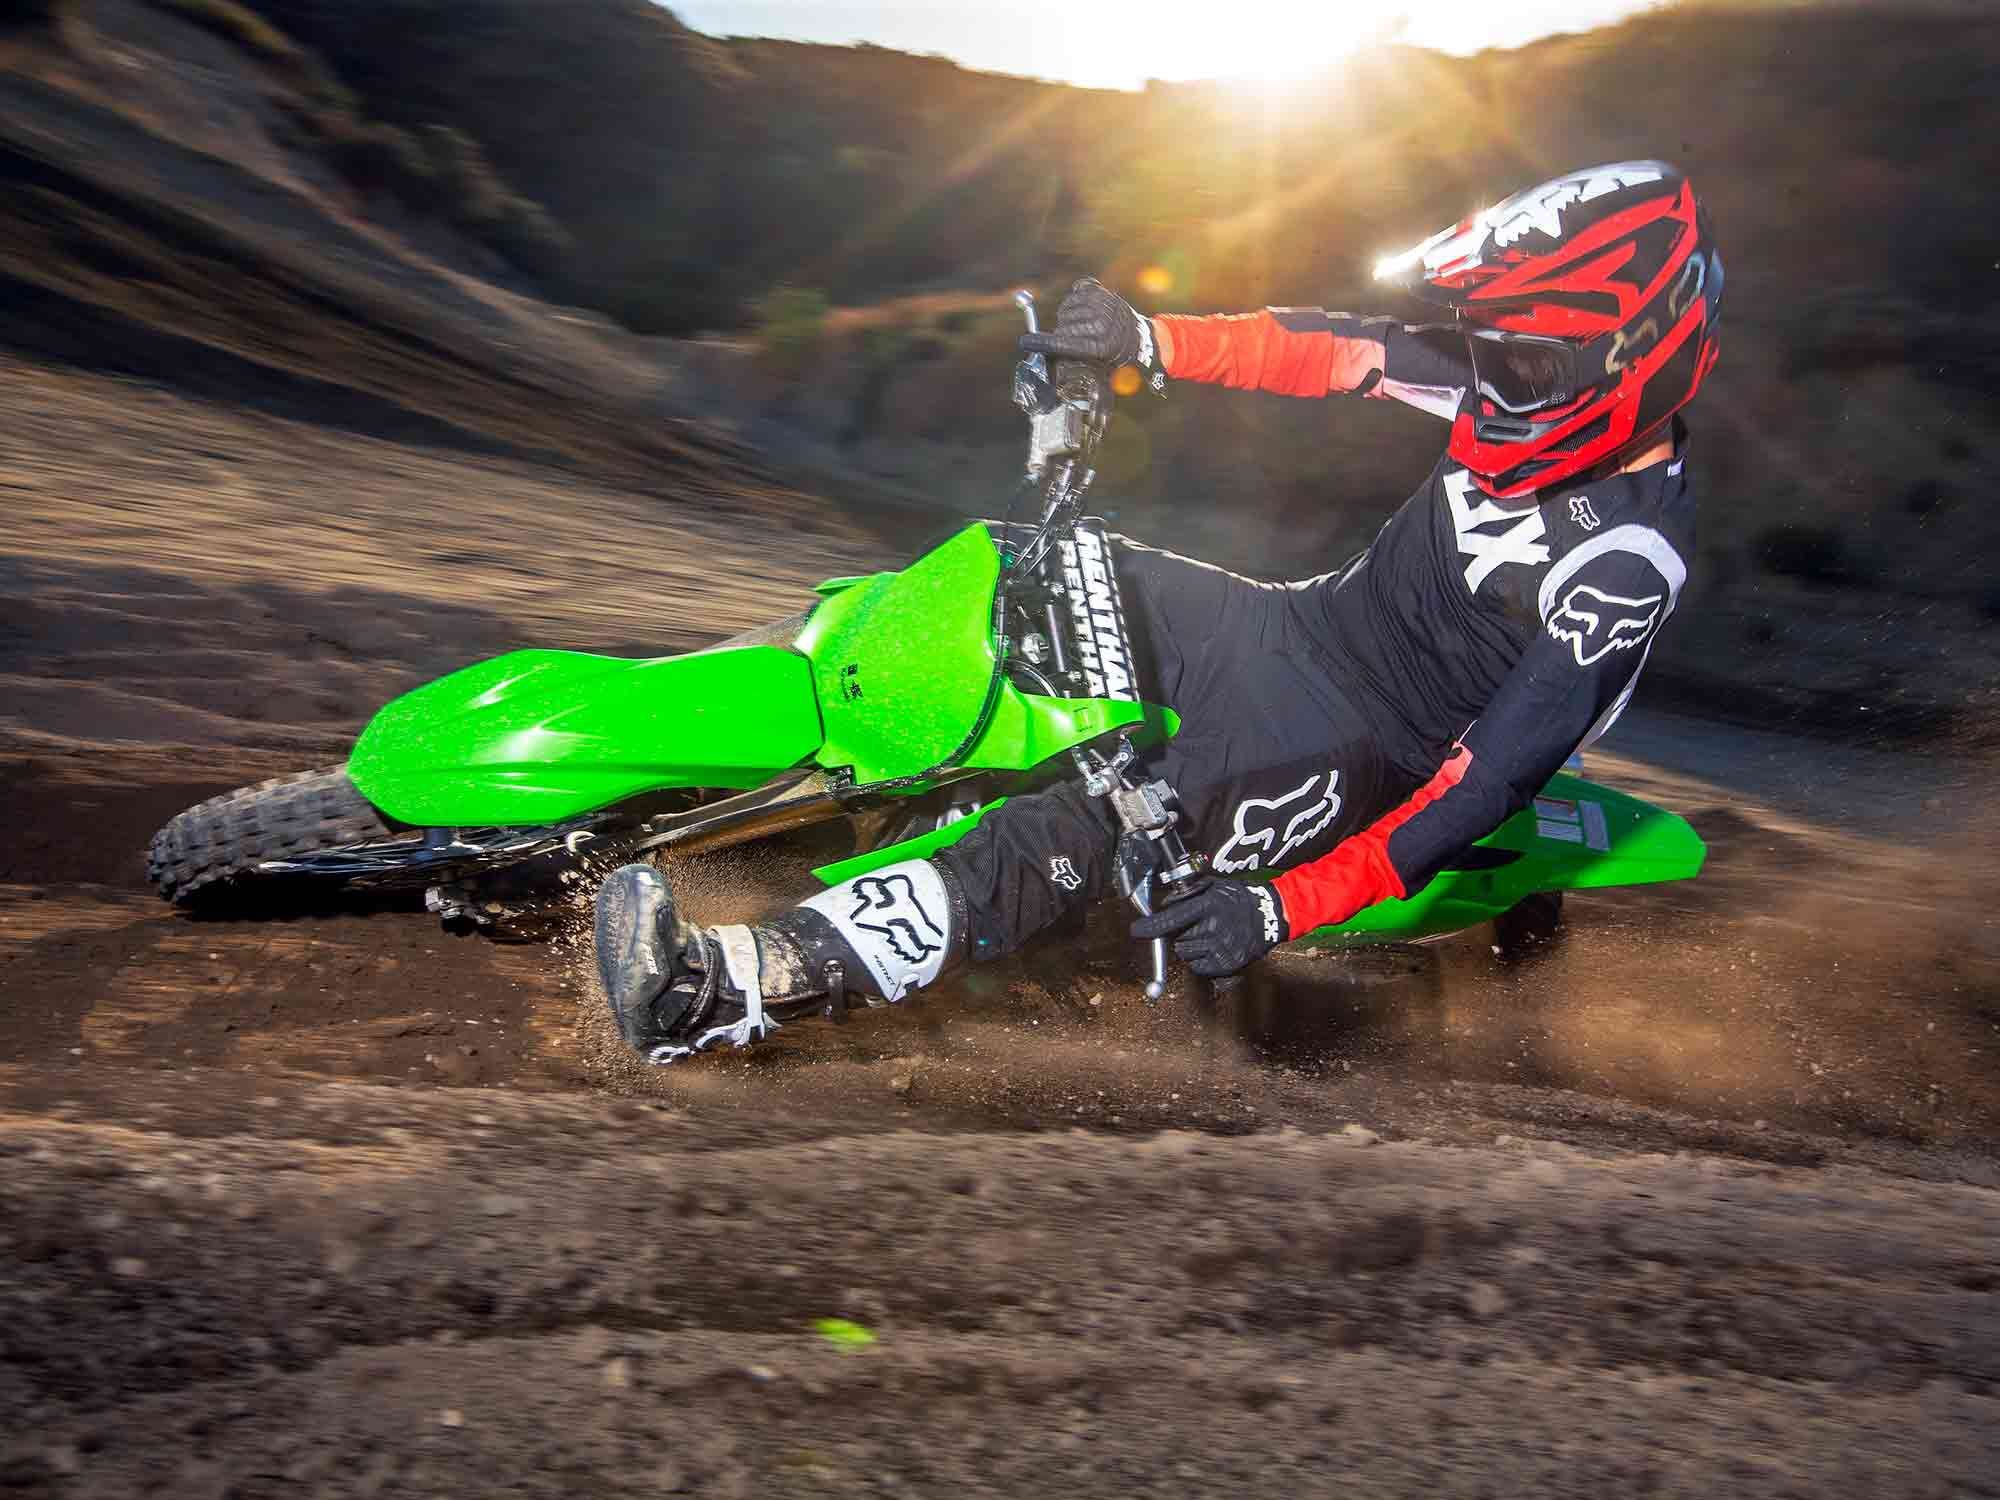 In claiming its second consecutive Best Motocrosser honor, the Kawasaki KX450 now has made the Ten Best Bikes list five times.